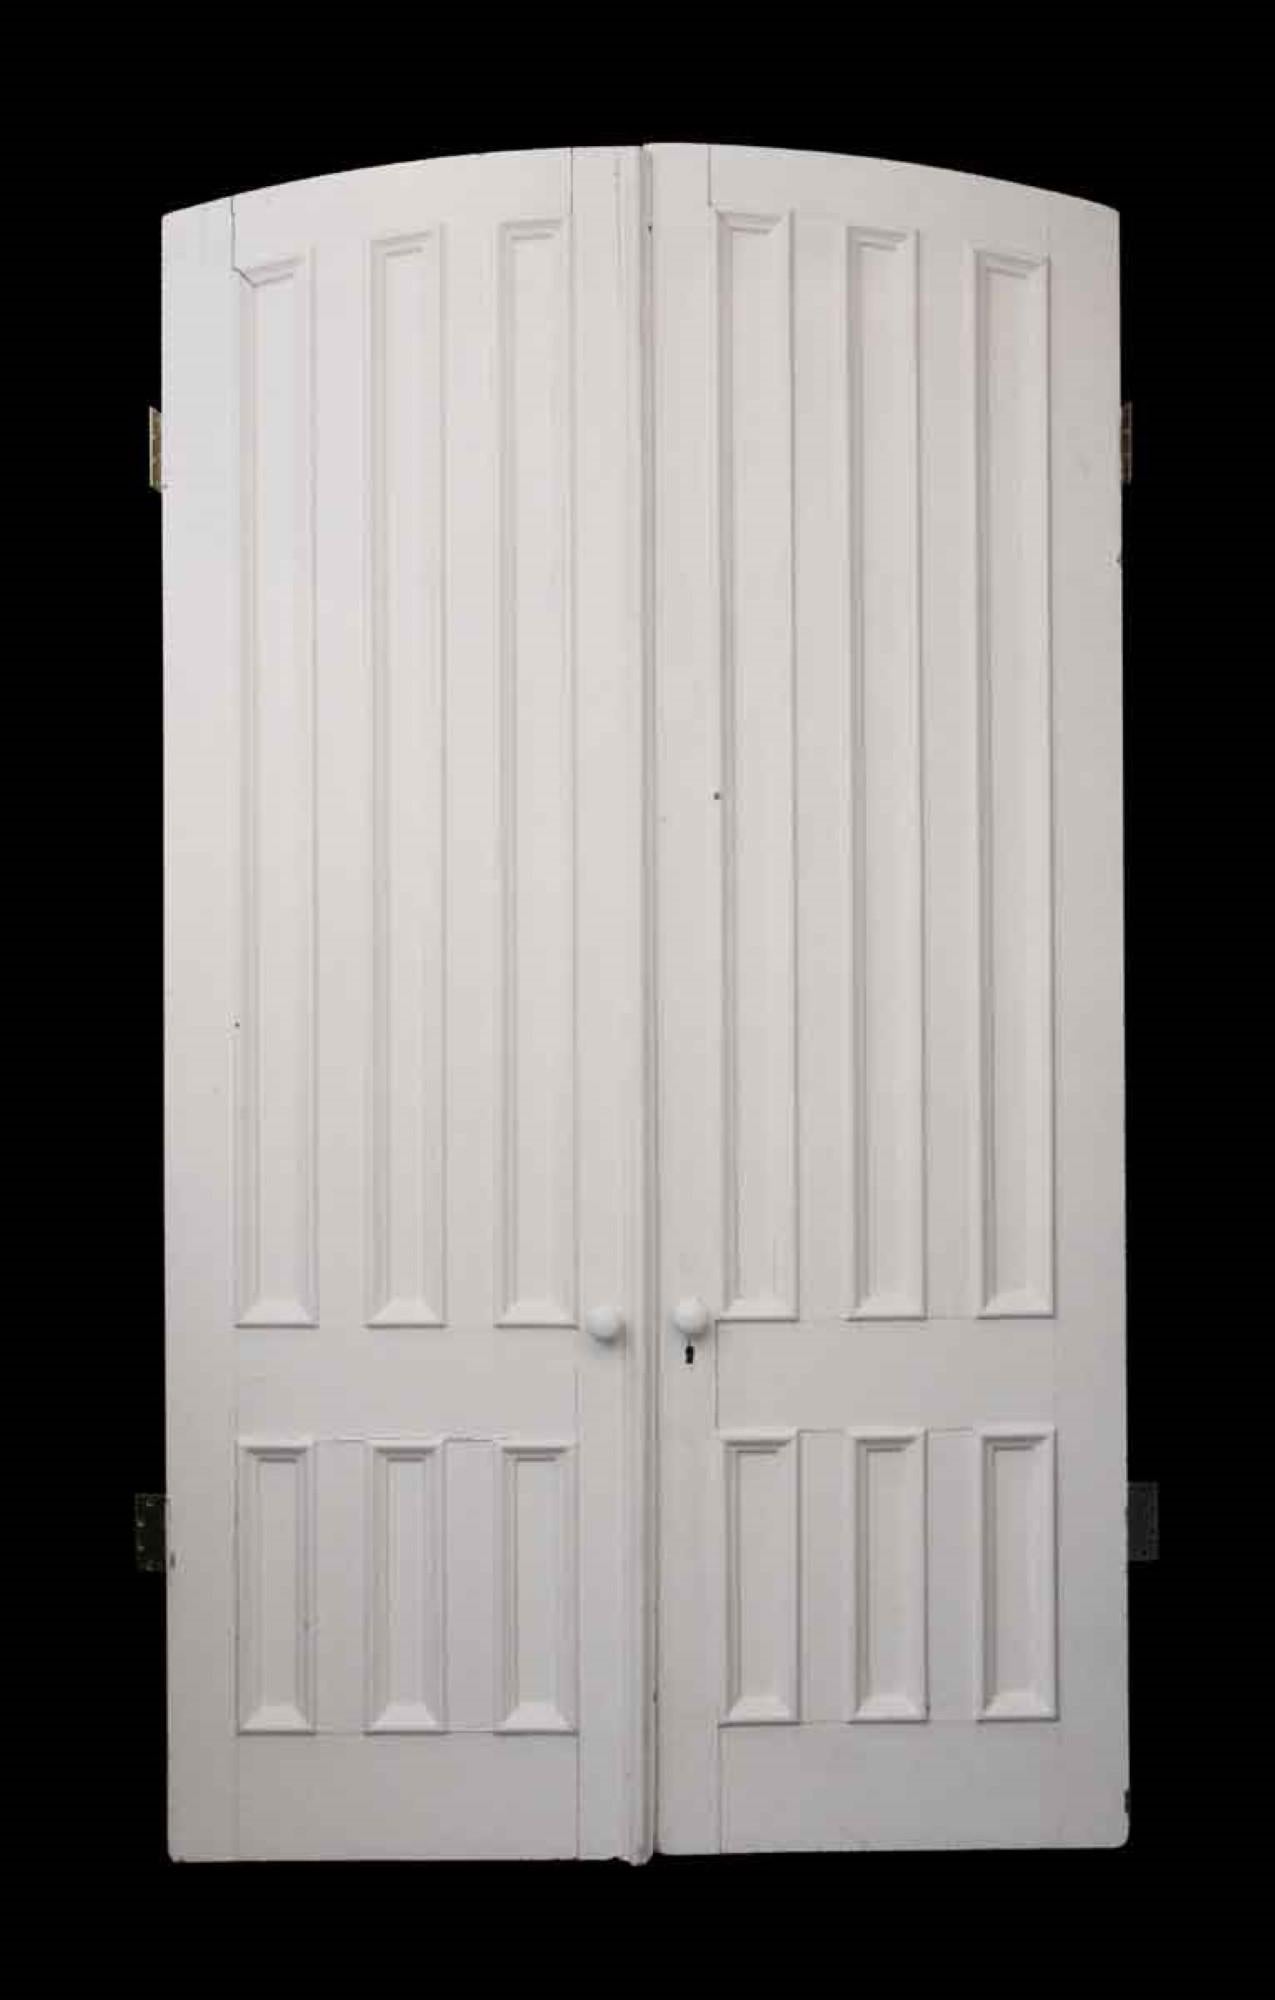 Very thick pair of interior parlor doors painted white. Features the original porcelain door handles from the 1880s. Each door has six narrow recessed panels with raised side moldings. Gentle arch on top. Measures: 107 x 60.5. This can be seen at